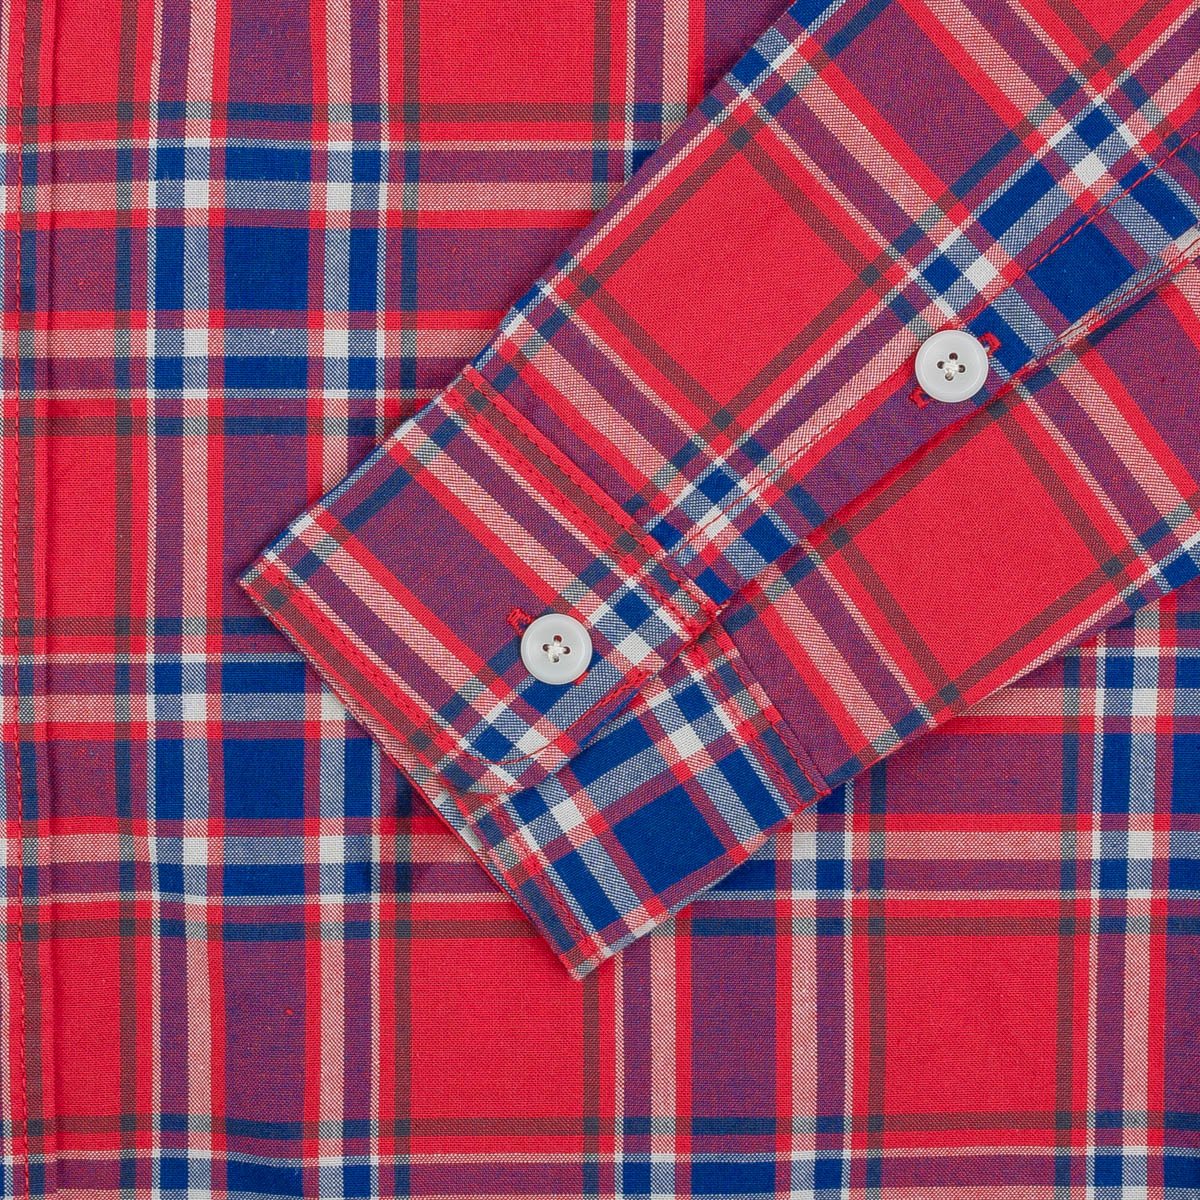 Iron Heart IHSH-356-RED 5oz Selvedge Madras Check Work Shirt - Red